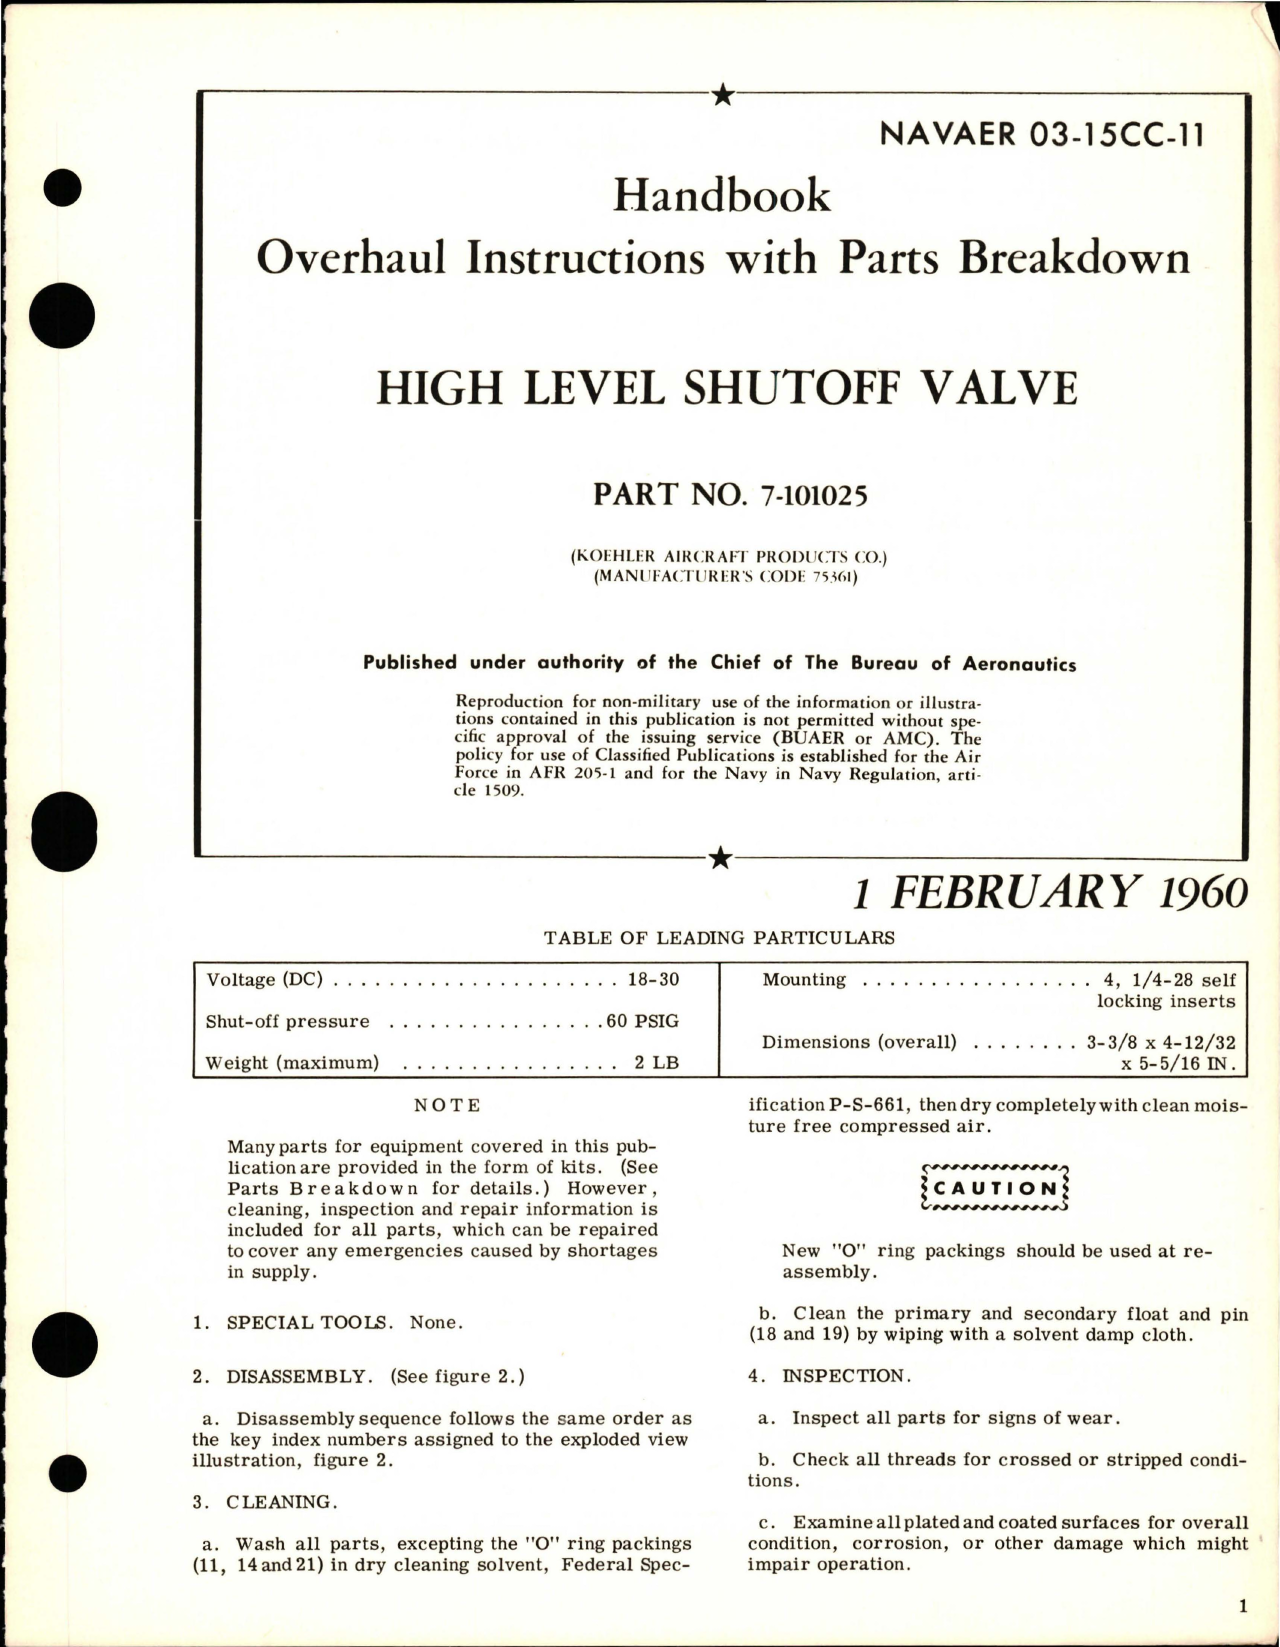 Sample page 1 from AirCorps Library document: Overhaul Instructions with Parts Breakdown for High Level Shutoff Valve - Part 7-101025